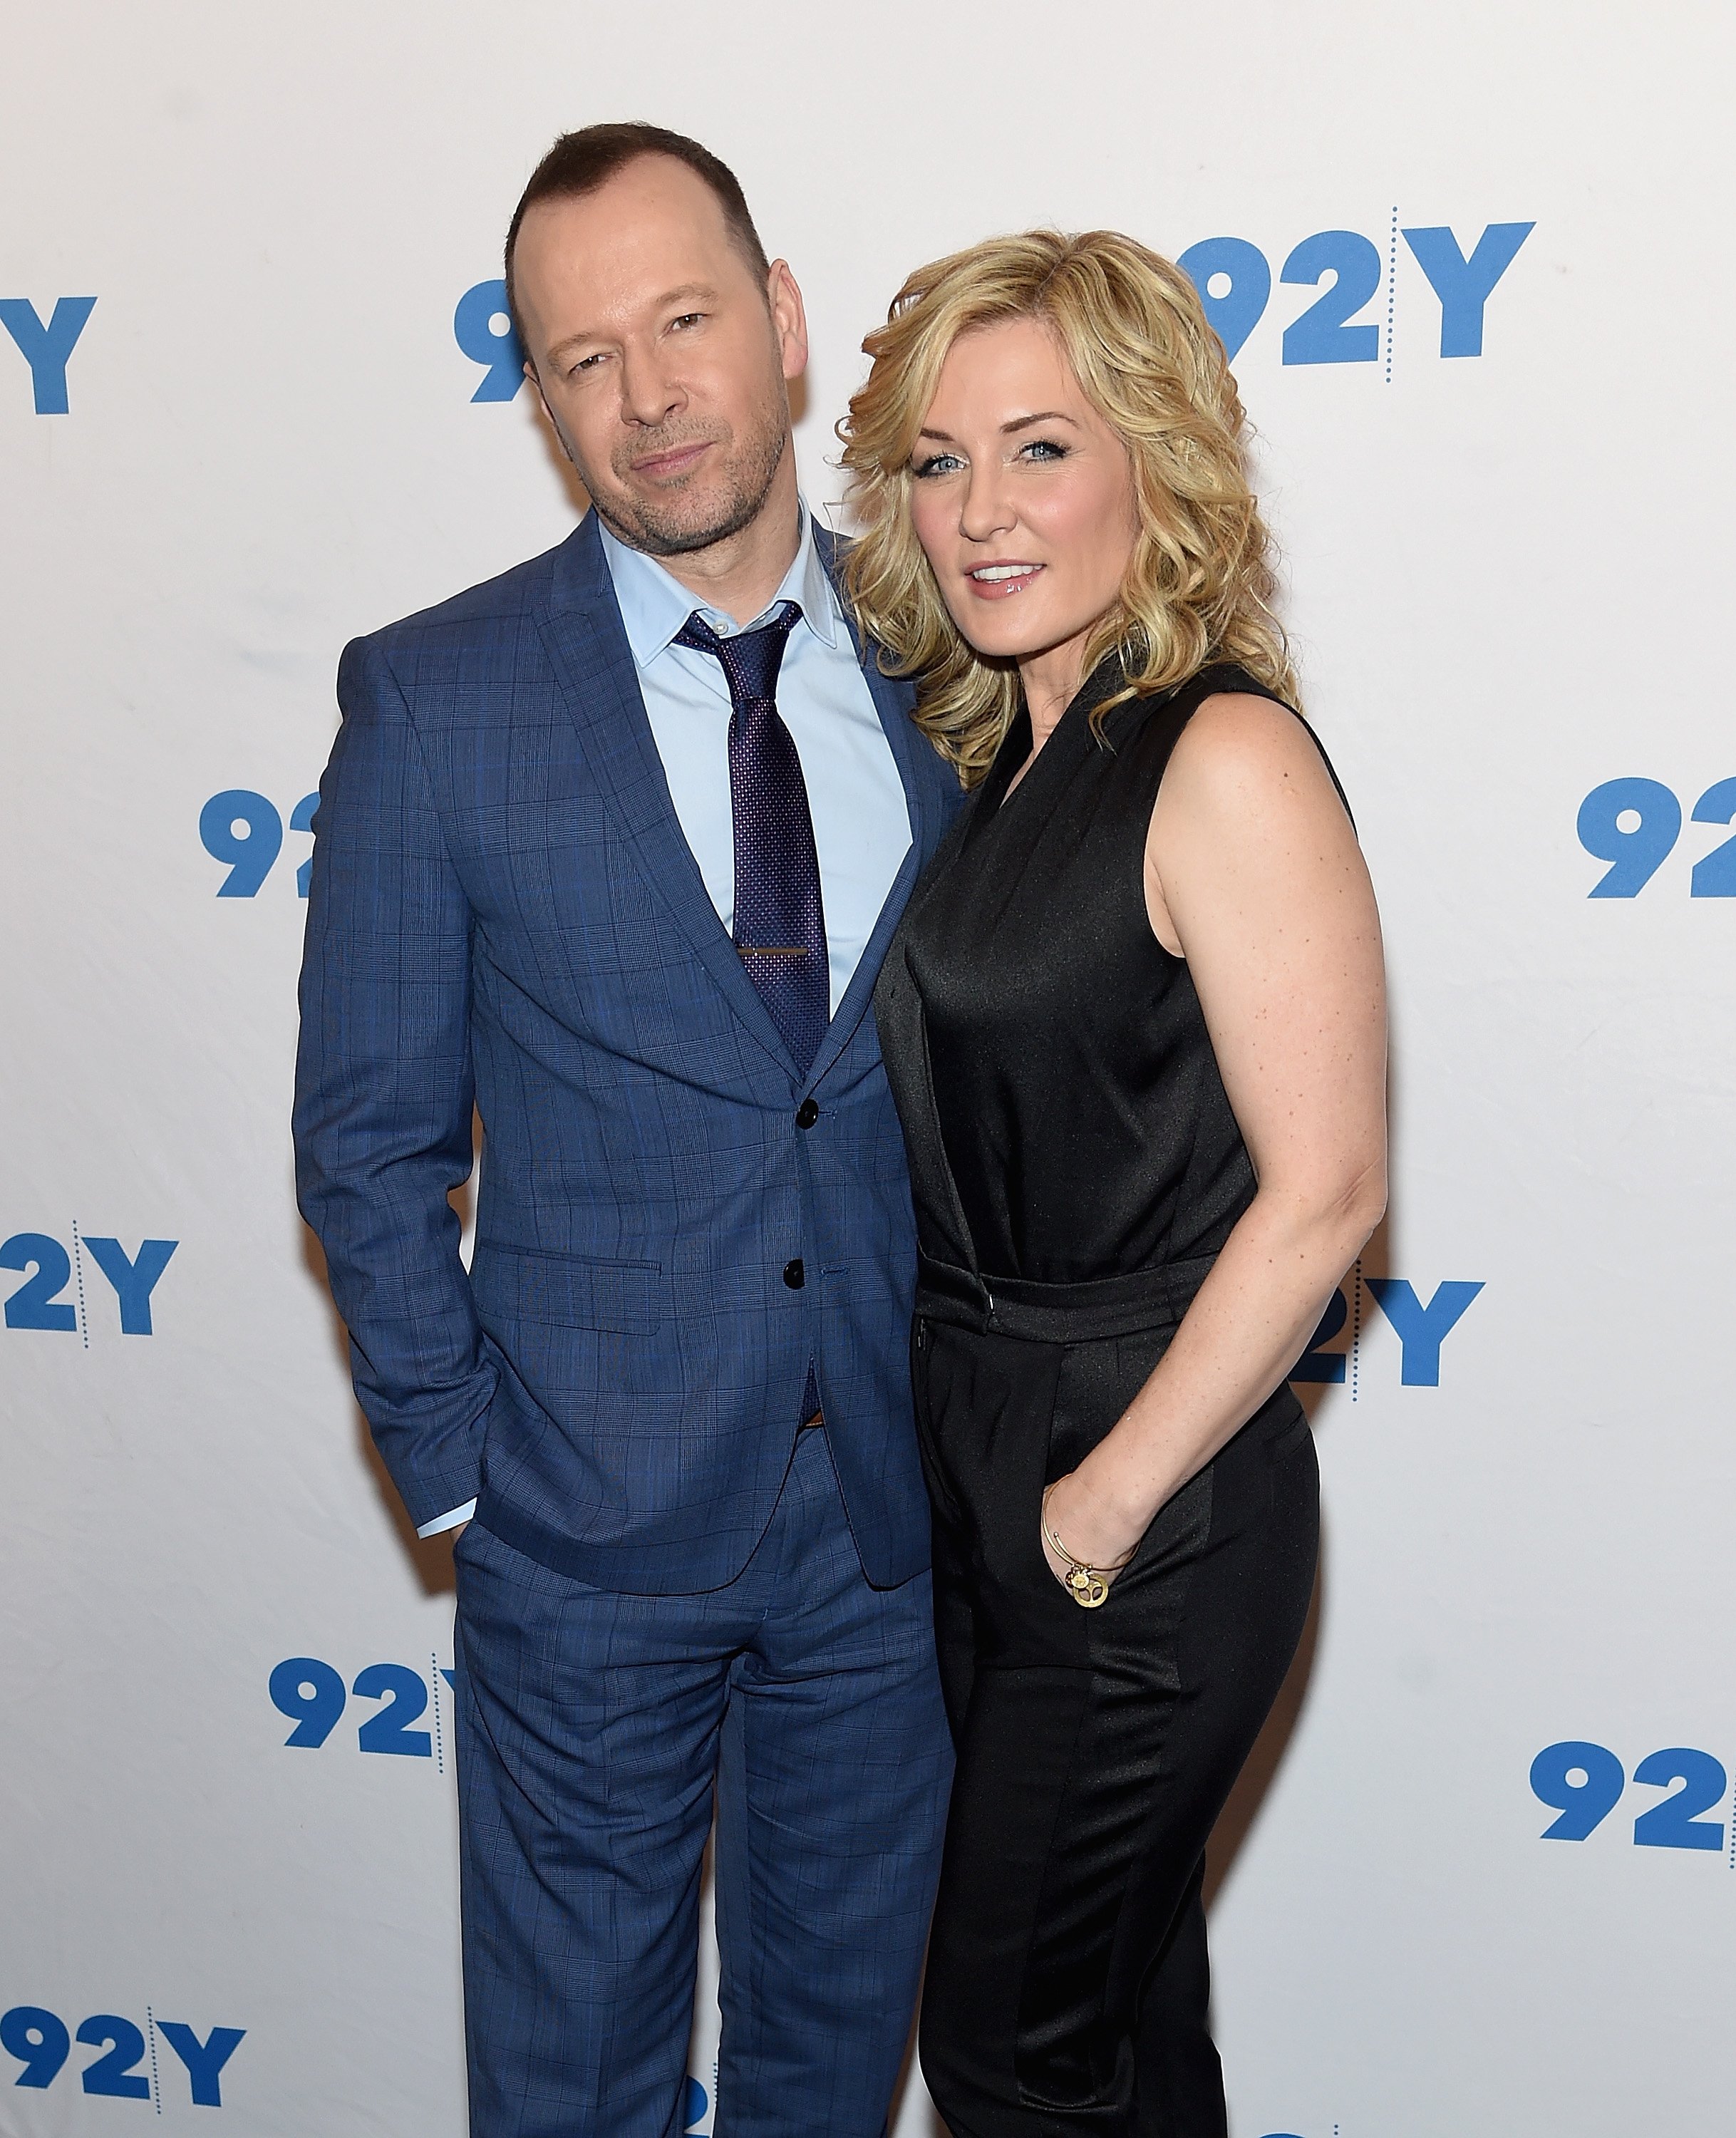 : Donnie Wahlberg and Amy Carlson attend the "Blue Bloods" 150th Episode Celebration at 92Y on March 27, 2017 in New York City. | Photo: GettyImages